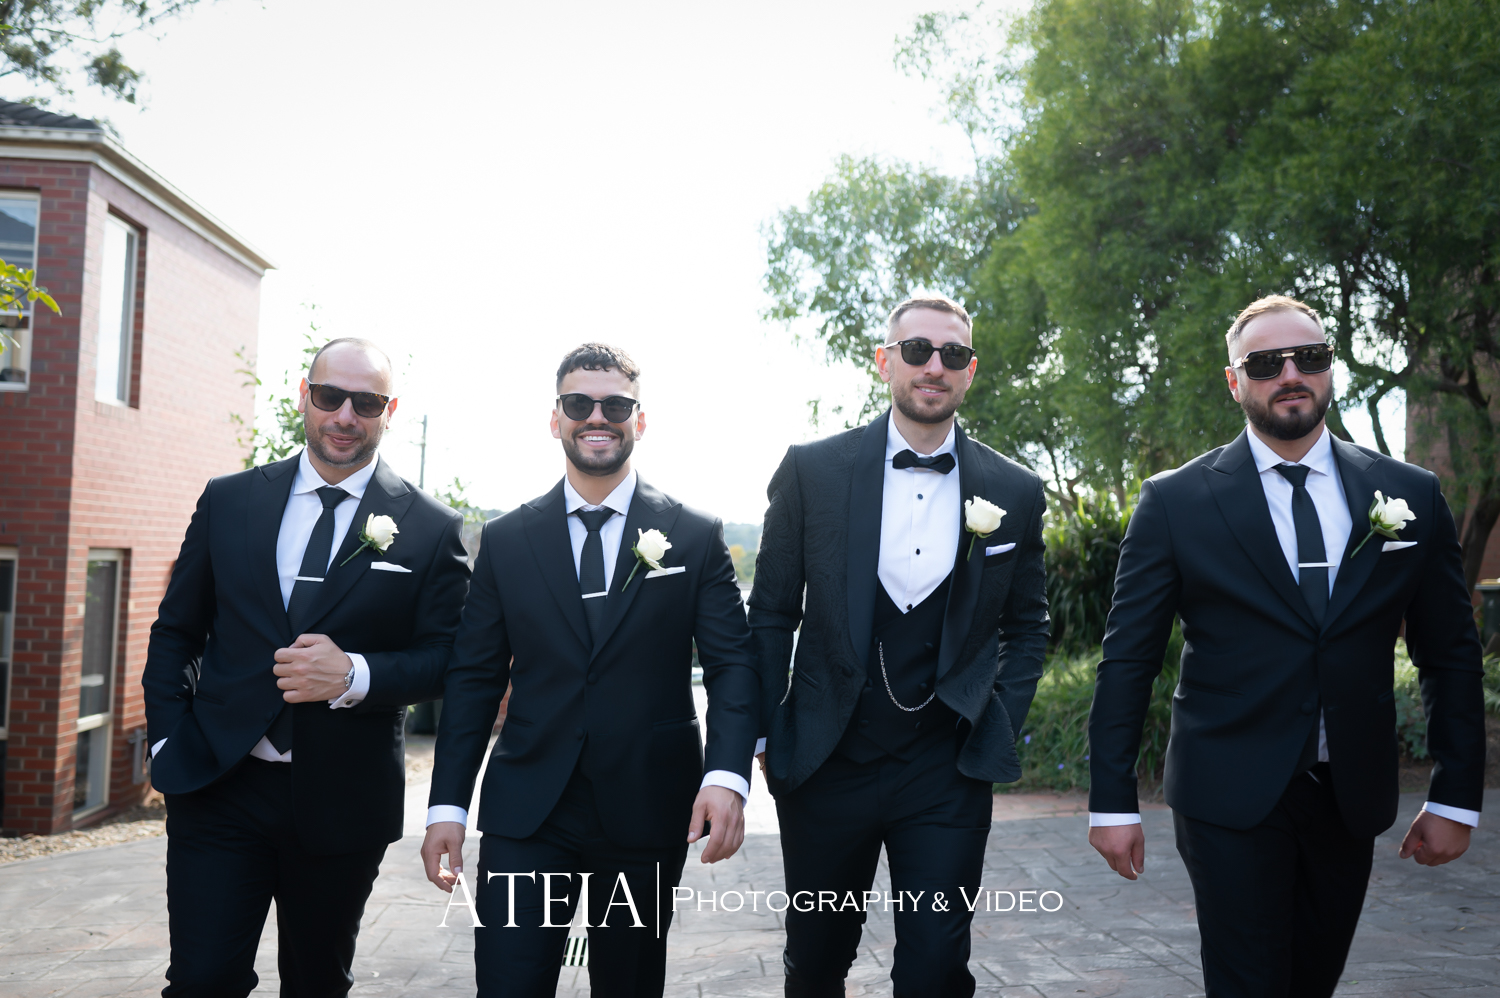 , Giorgia and Michael&#8217;s wedding at Showtime Events Docklands captured by ATEIA Photography &#038; Video